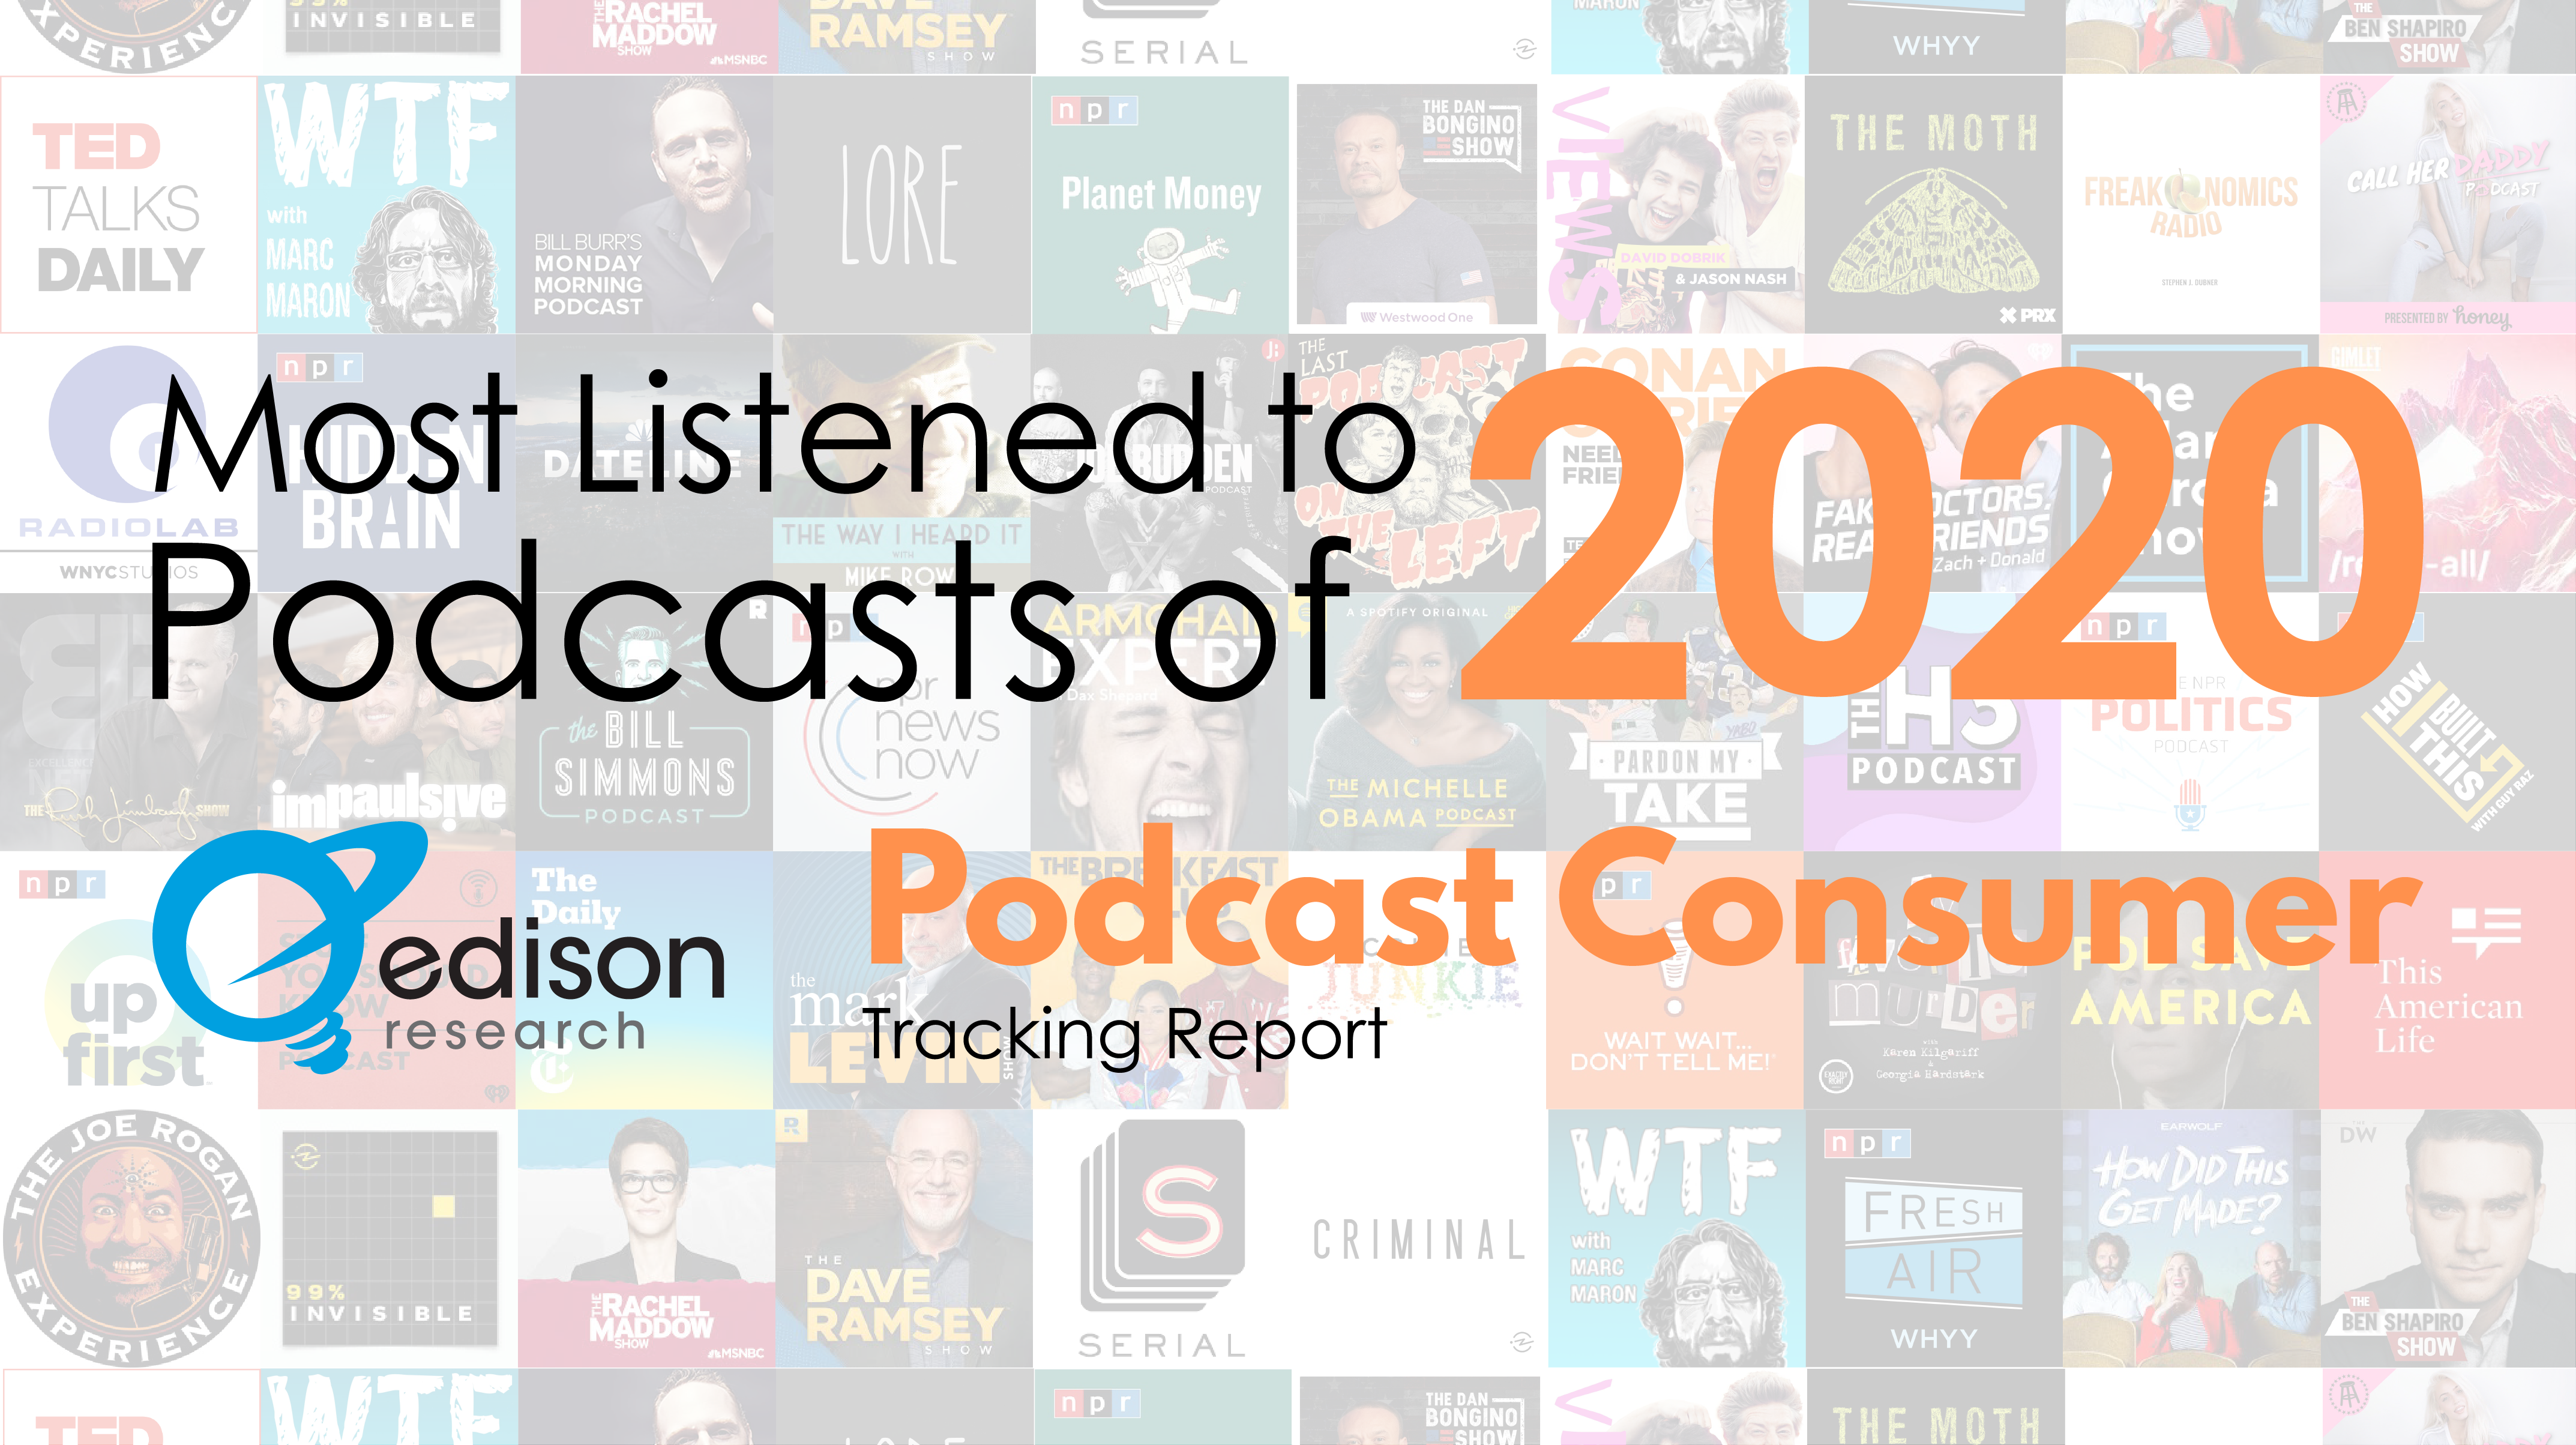 Ofre Lab hundrede The Top 50 Most Listened to U.S. Podcasts of 2020 - Edison Research